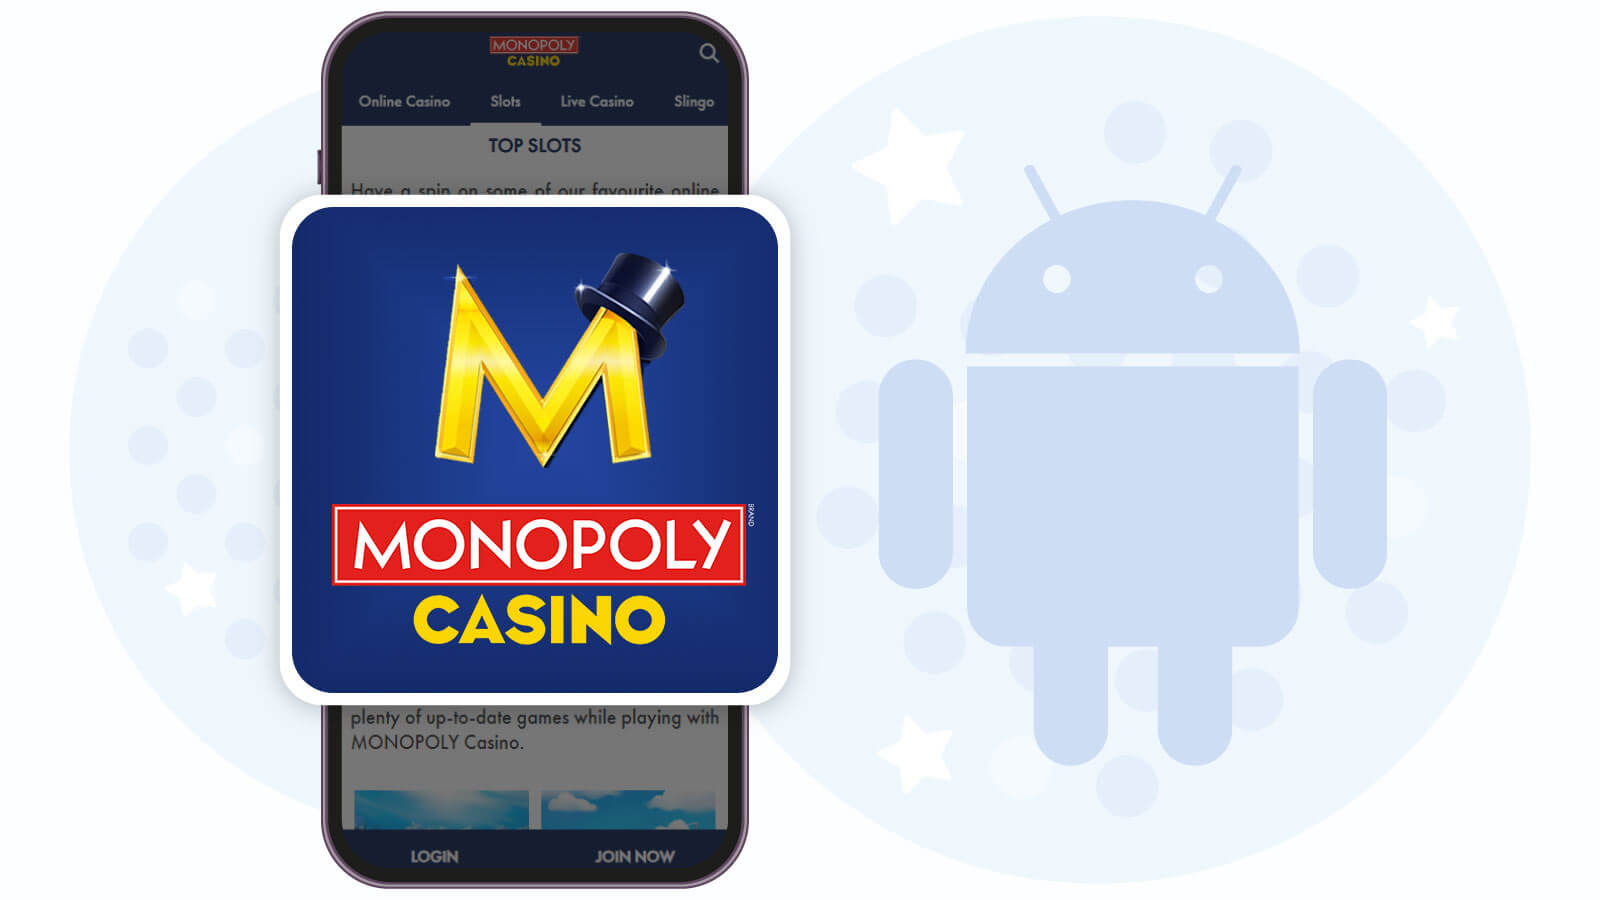 Monopoly Casino – Third Pick Android Mobile Casino App